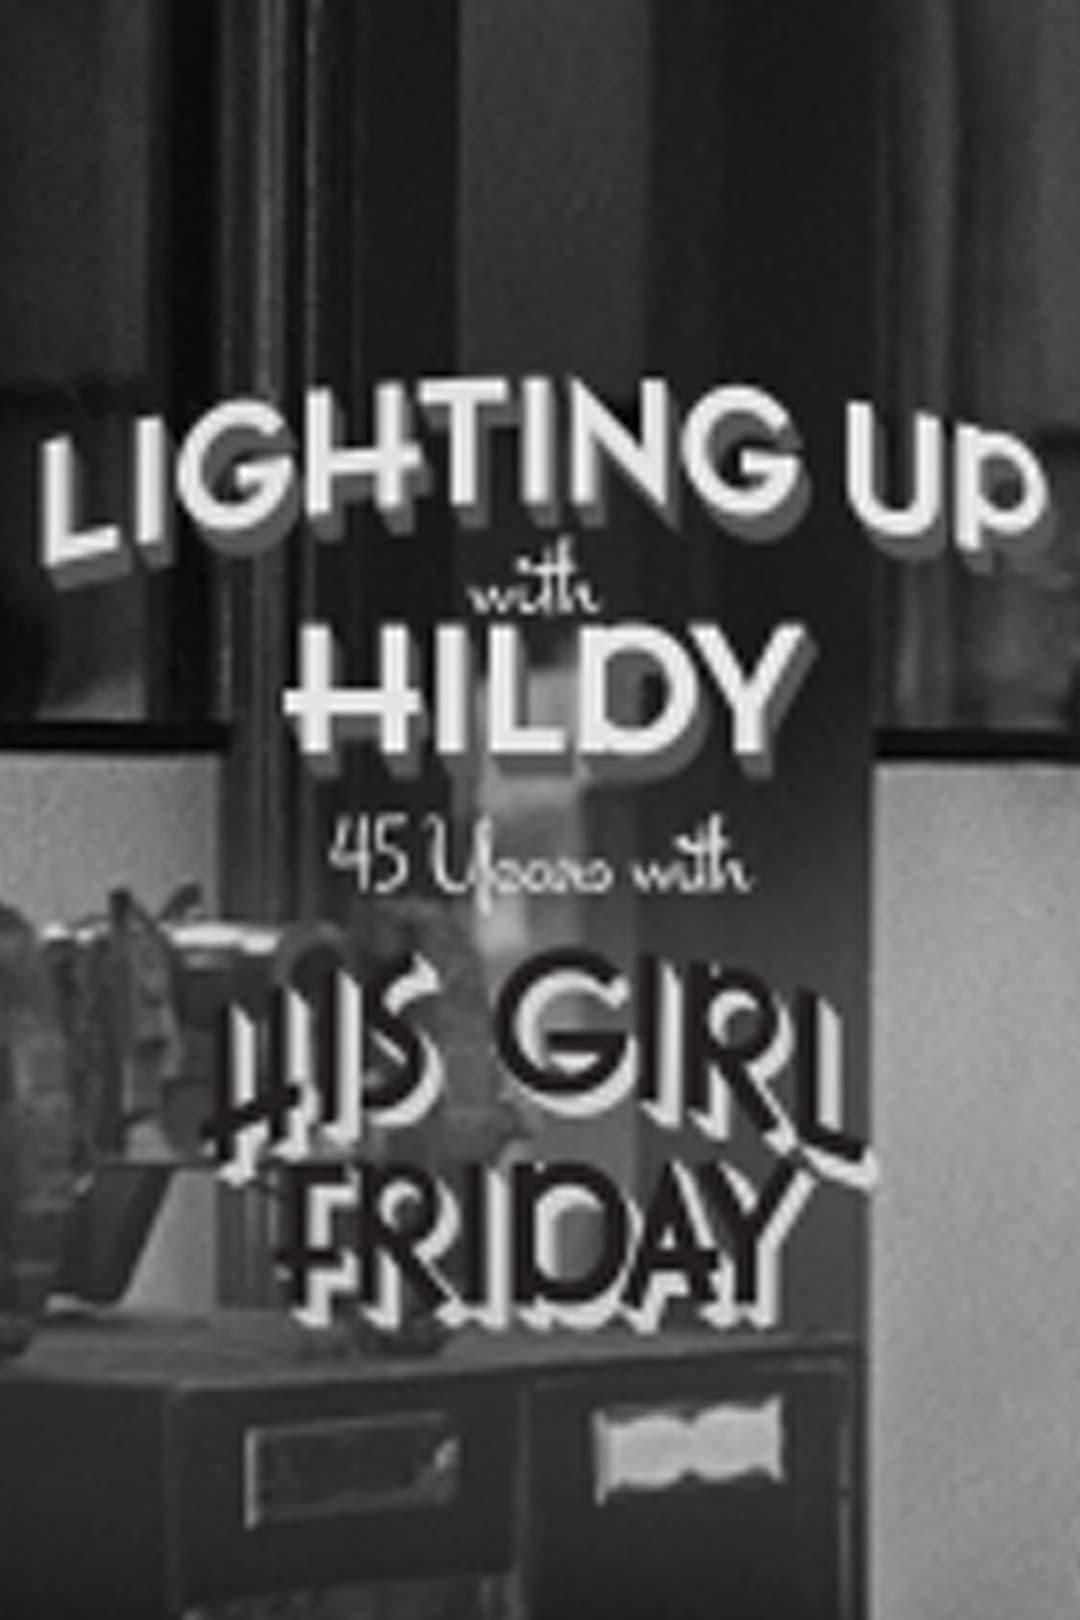 Lighting Up with Hildy Johnson poster